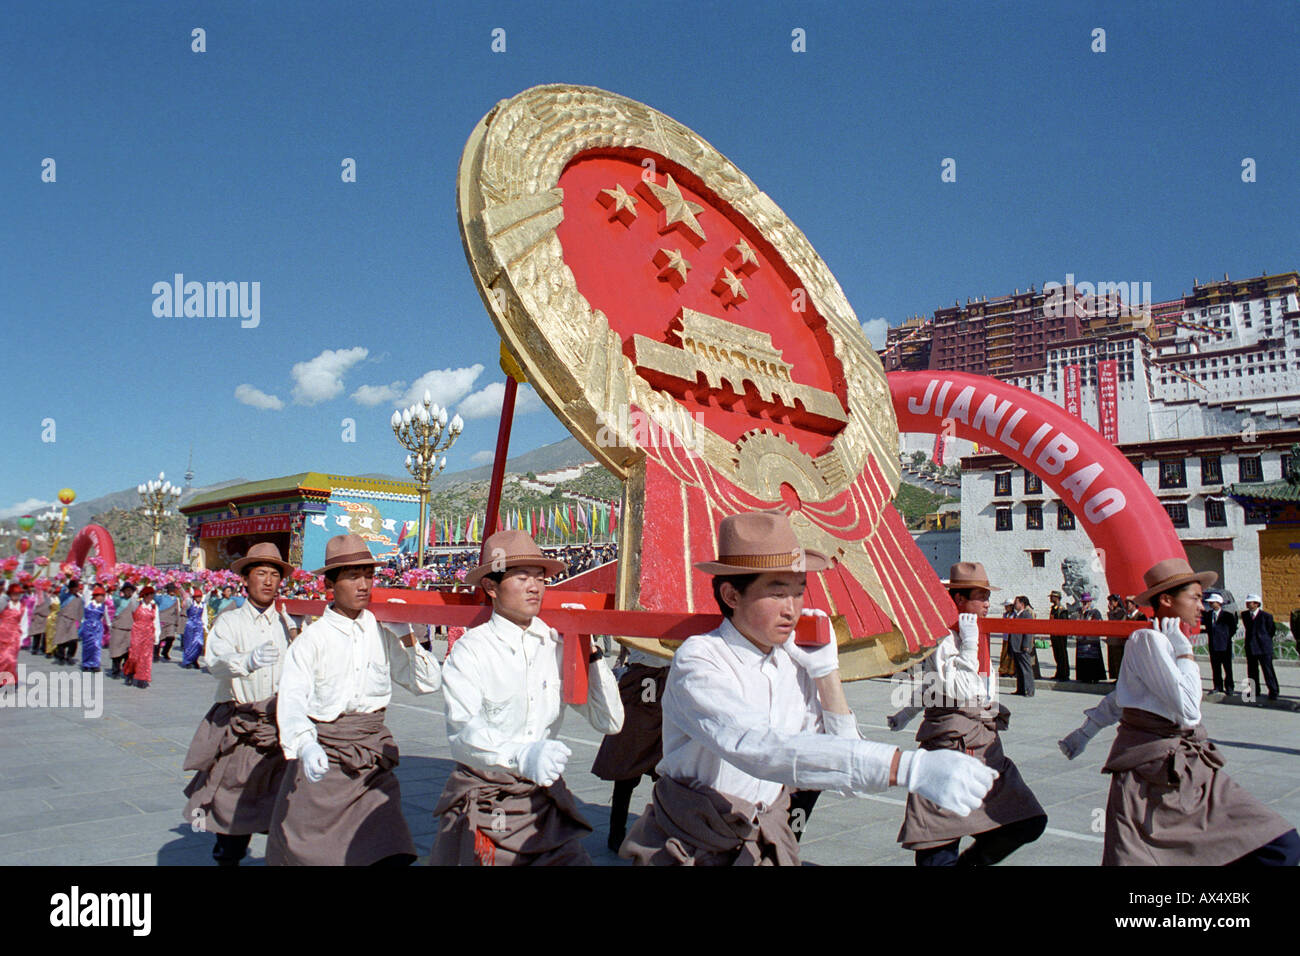 Tibetan hold a national emblem of the People's Republic of China in front of the Potala Palace during a ceremony in Lhasa.1995 Stock Photo